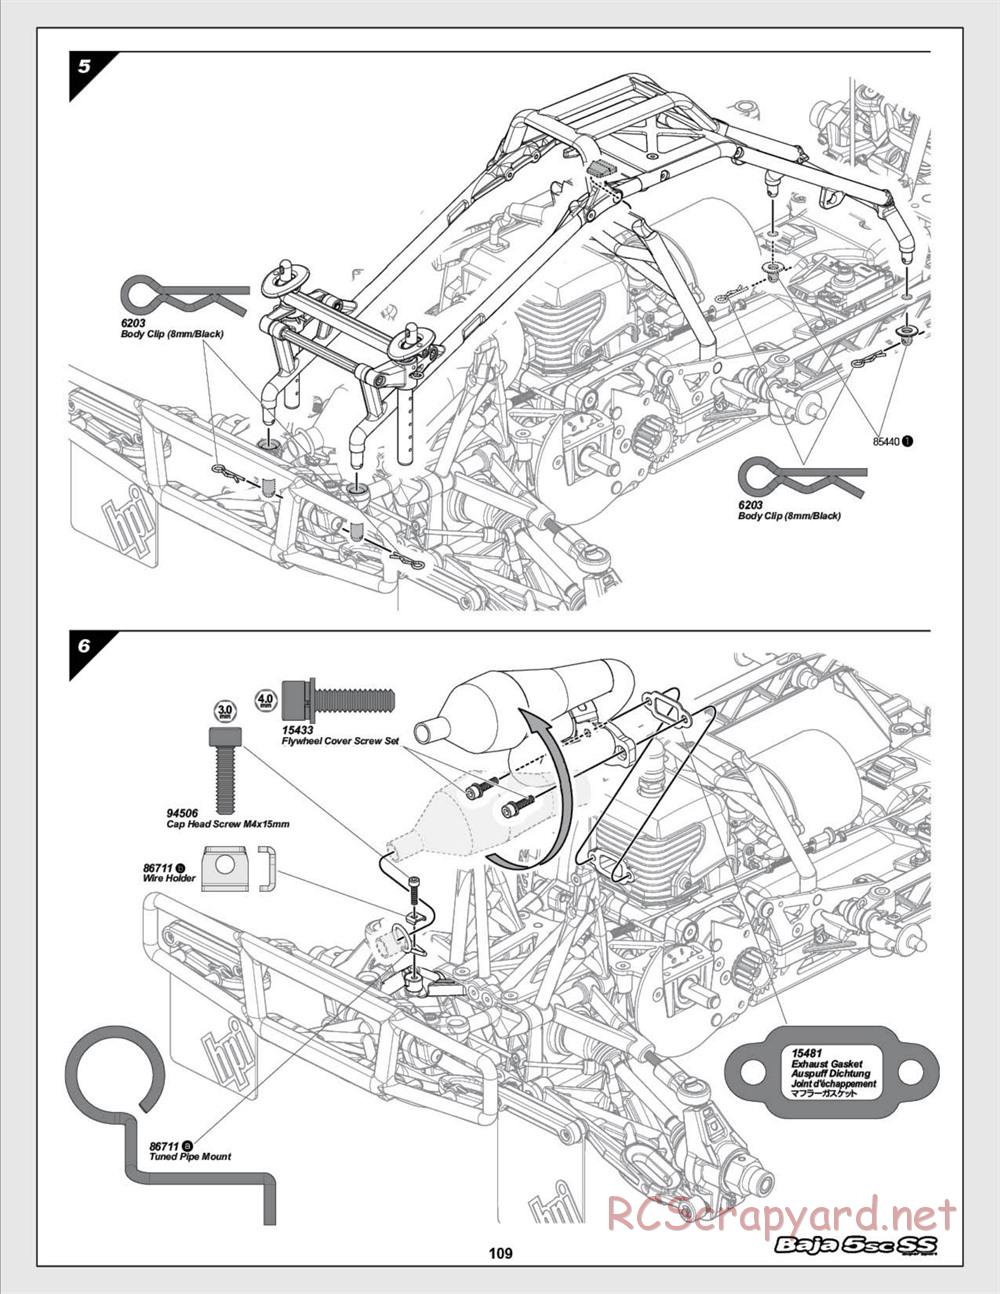 HPI - Baja 5SC SS - Exploded View - Page 109